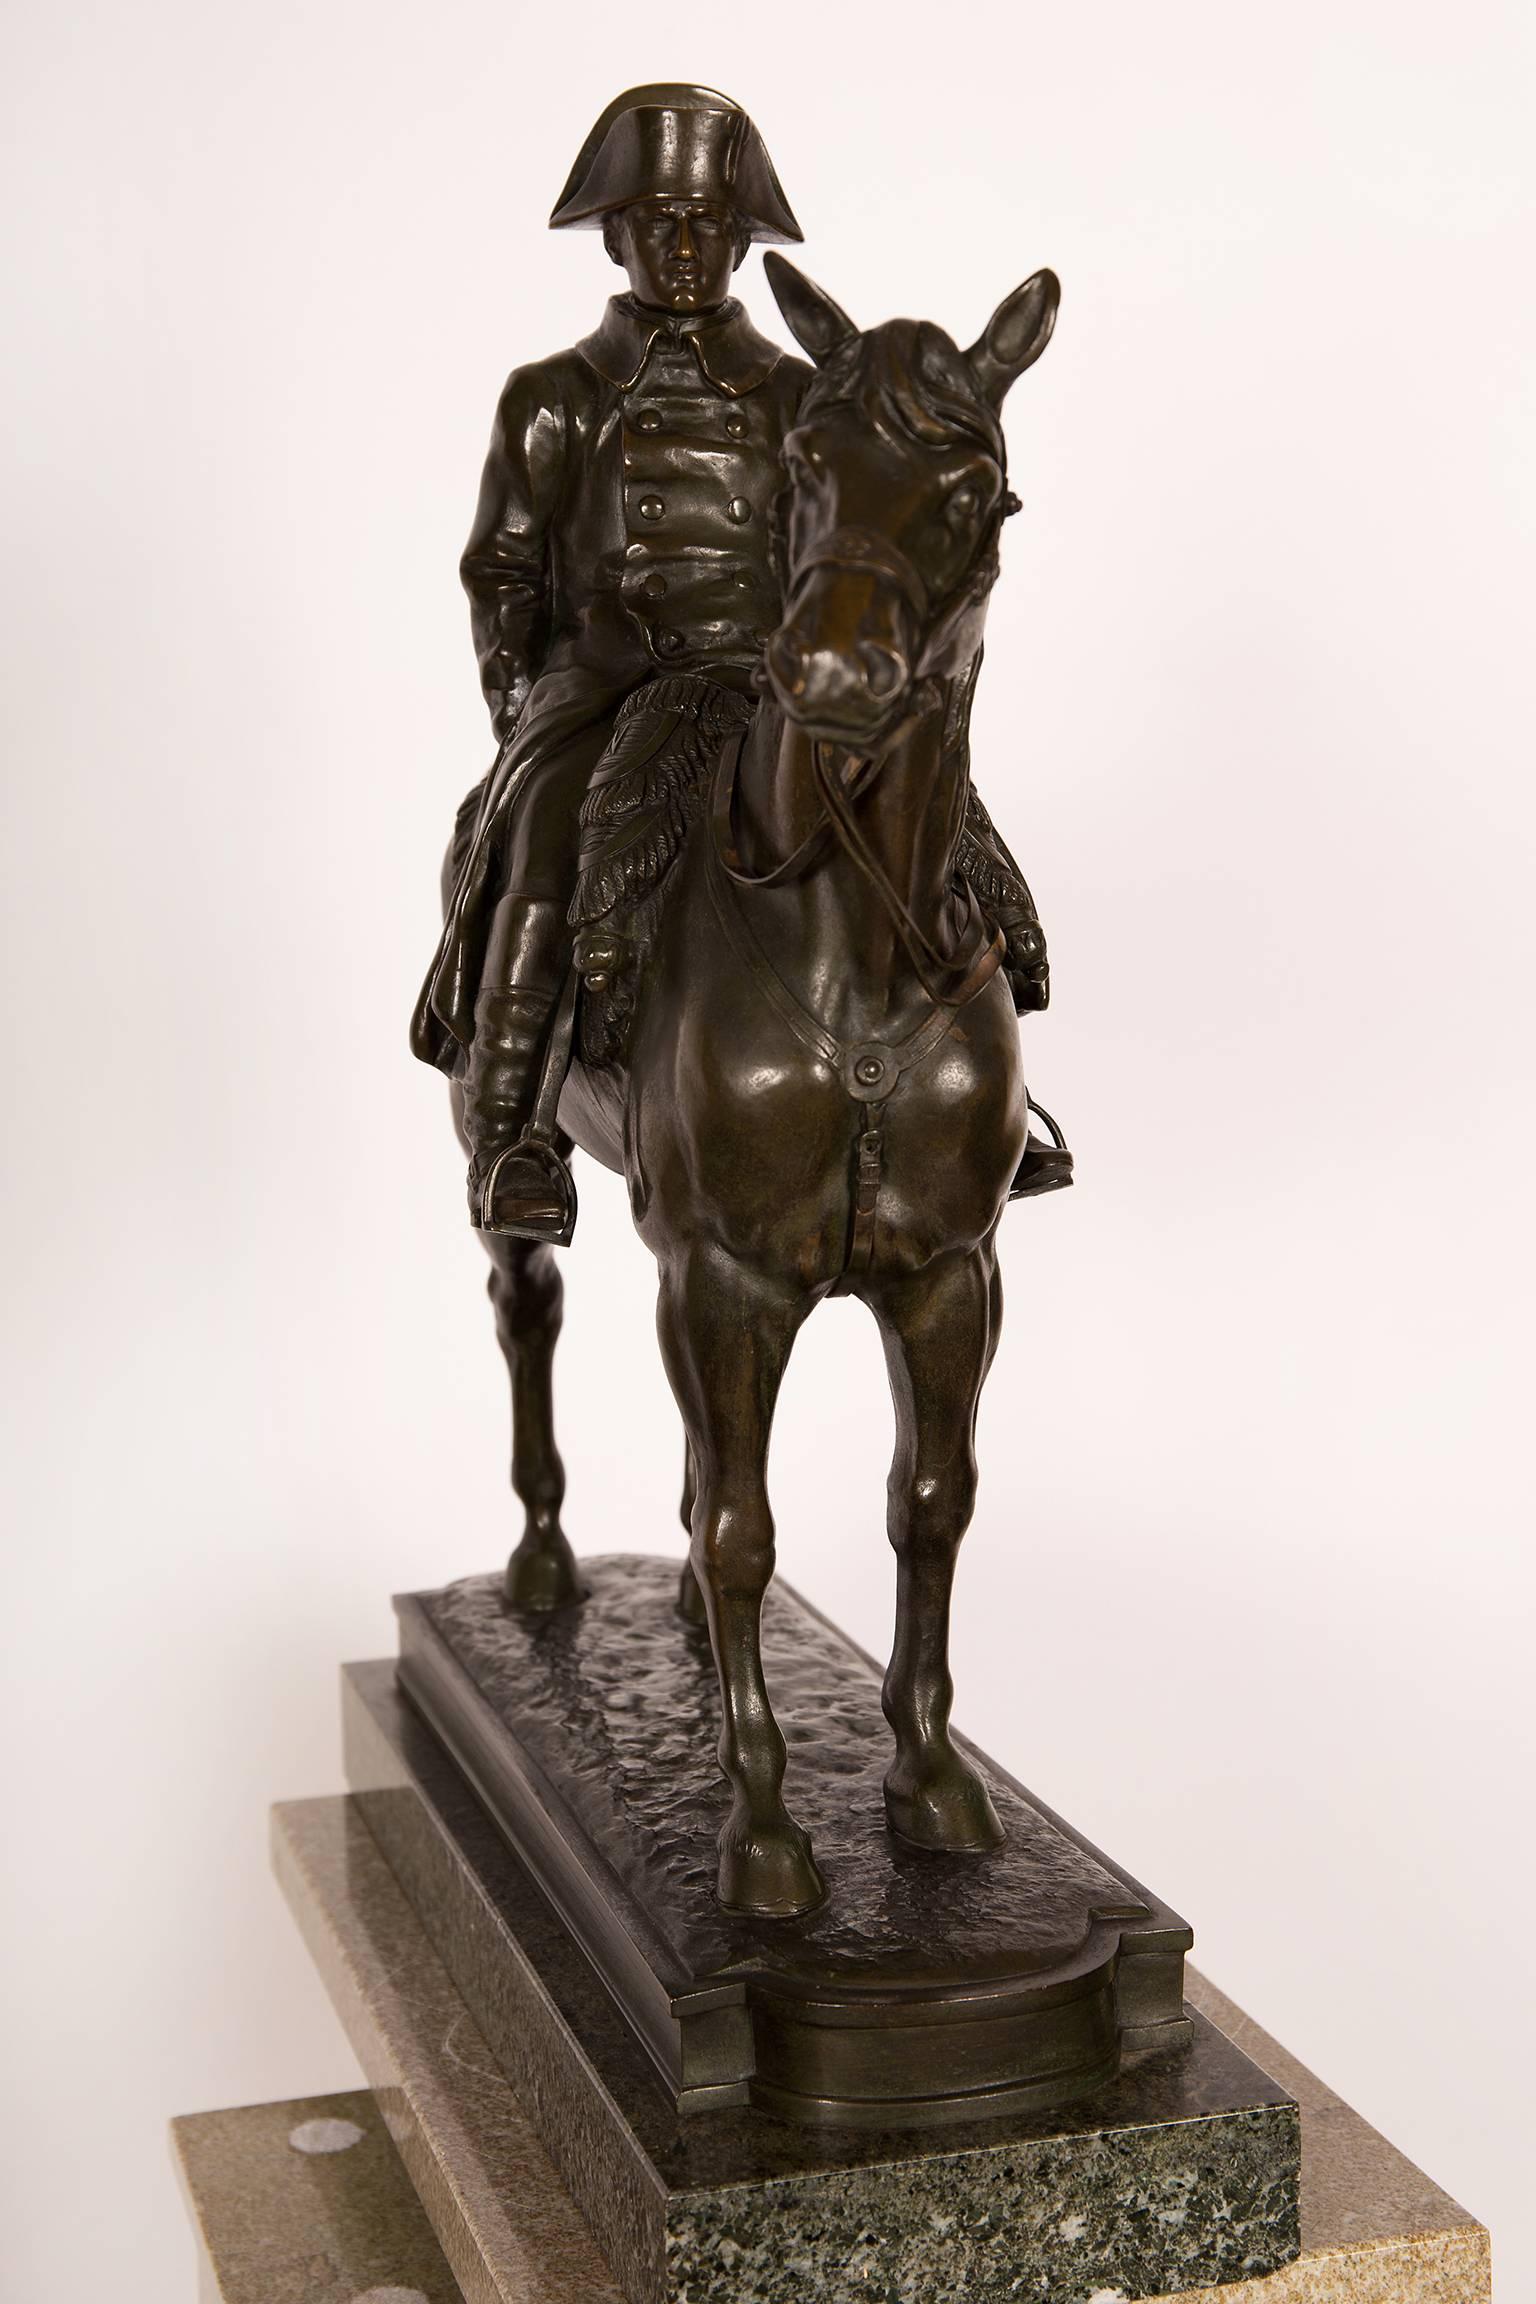 Green patinated bronze sculpture of Napoleon on horseback on a verde antico green marble base. Signed on the base of the bronze: A. Vibert.
Alexandre Vibert (1847-1909) was a pupil of Emmanuel Frémiet and is mostly known for his sculptures and